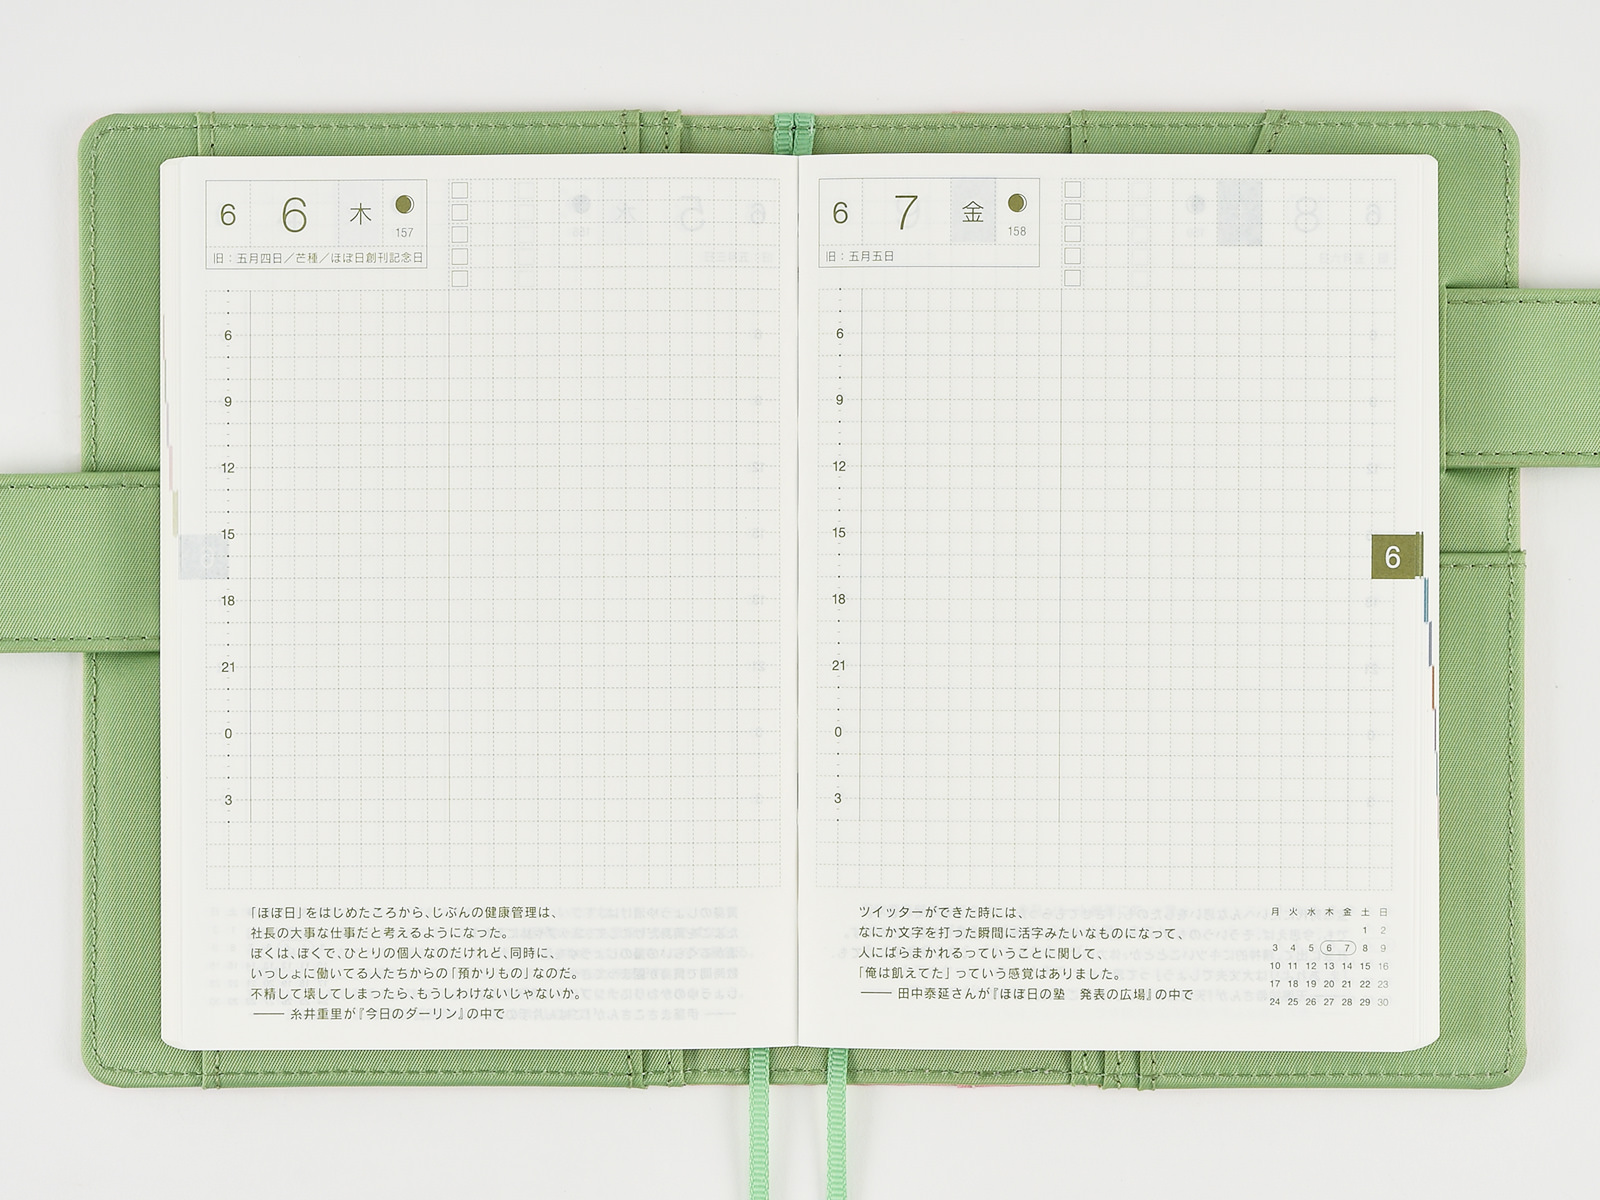 Hobonichi Daily Planner Hobo Techo Day Planner Hourly Planner